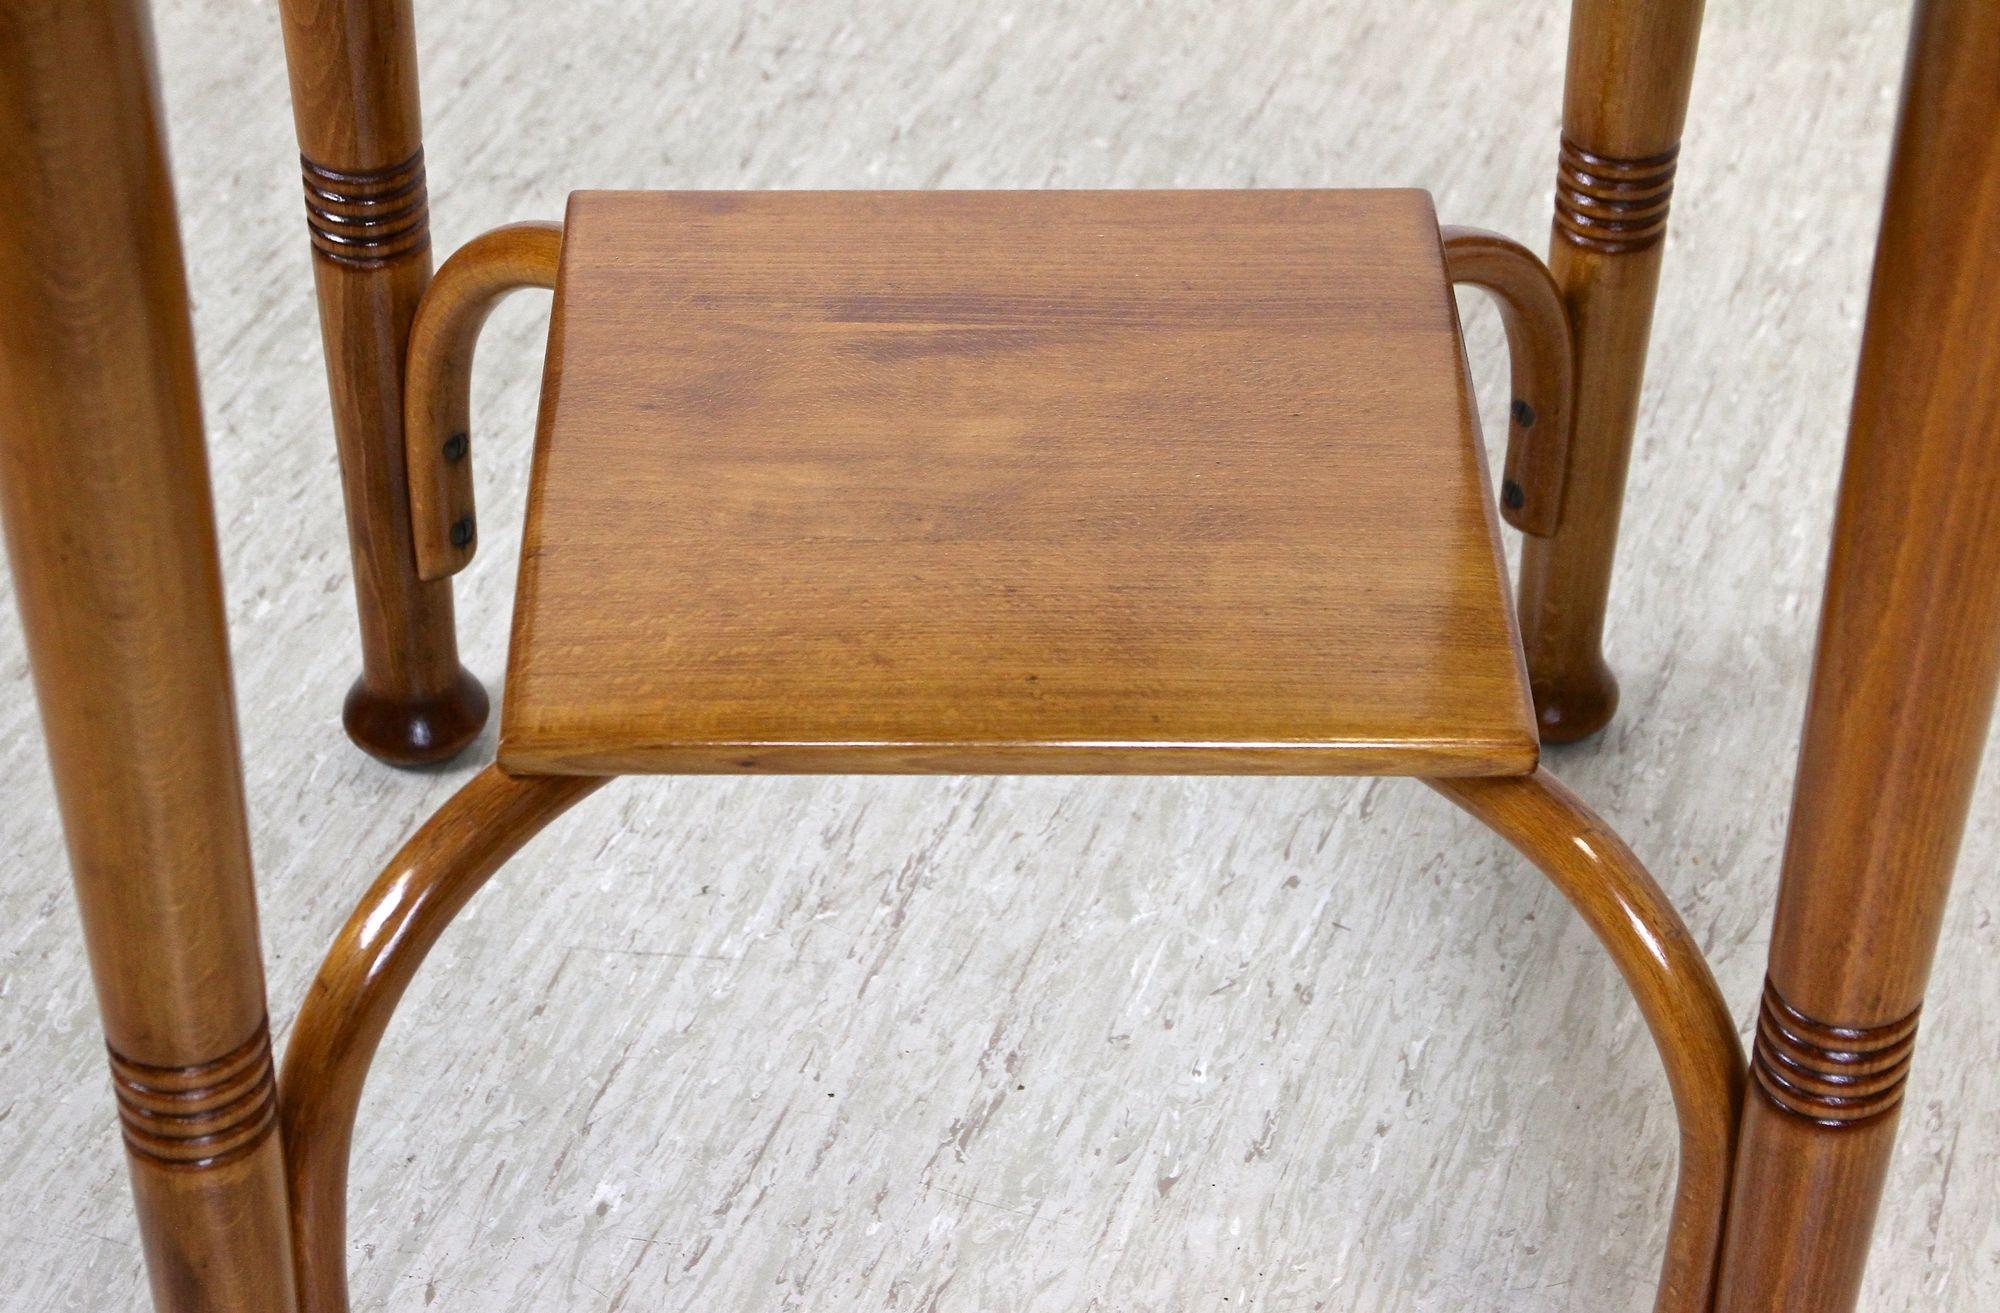 Thonet Bentwood Chairs with Table, Art Nouveau Seating Set, Austria, circa 1915 For Sale 5